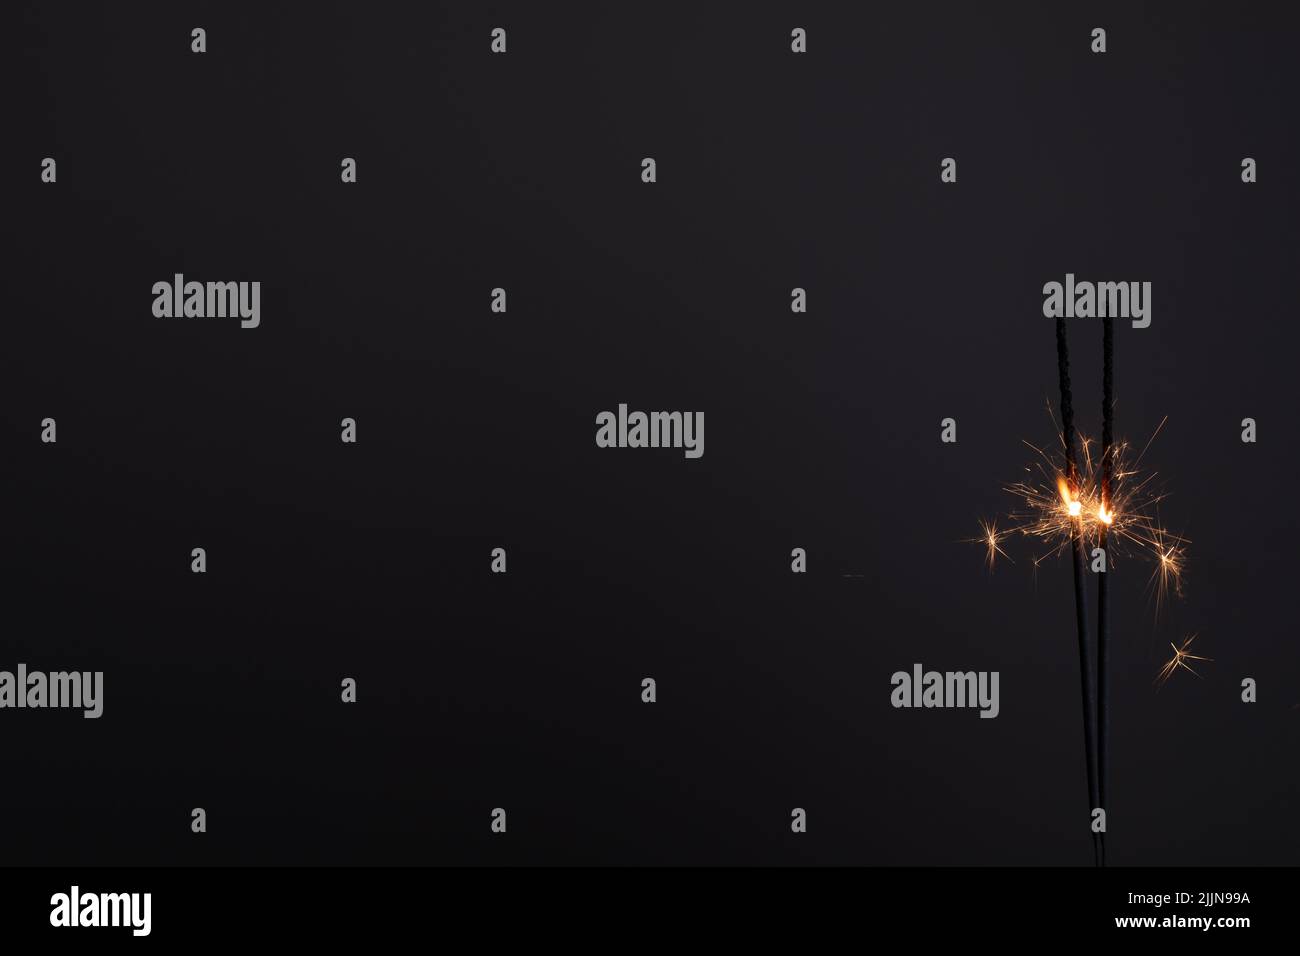 A wallpaper of couple bengal lights sparkling with black background Stock Photo